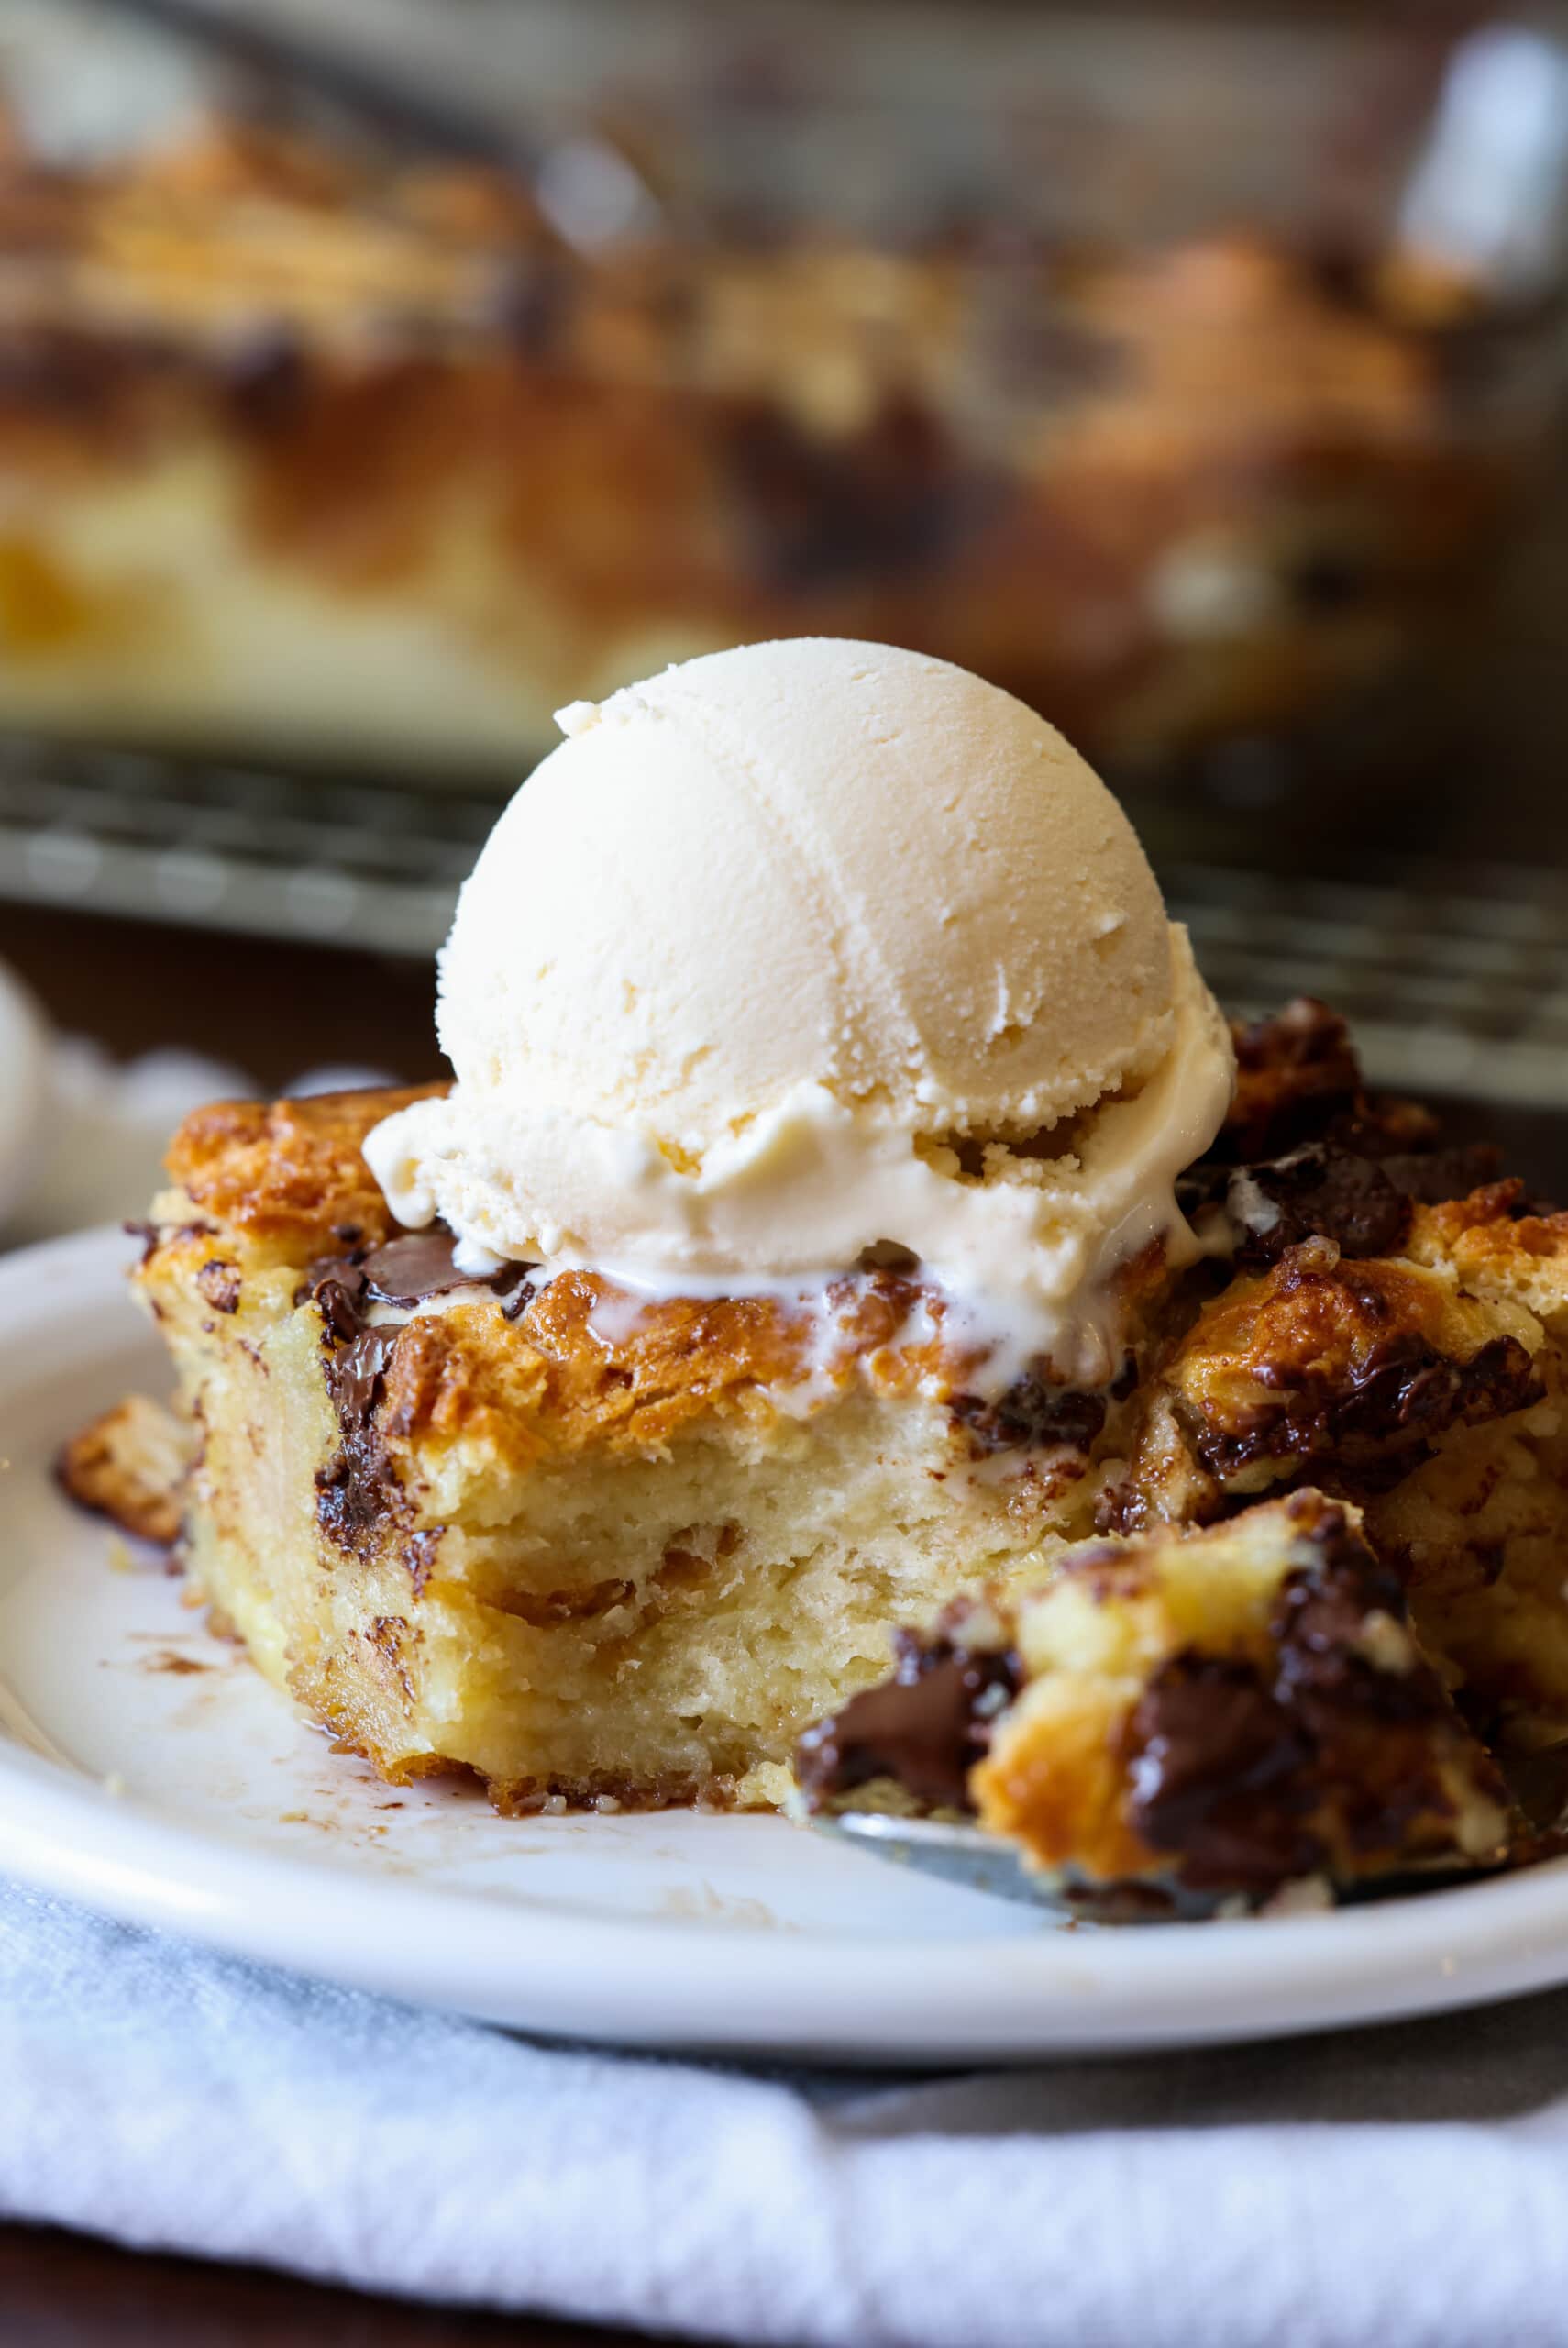 a piece of bread pudding made with biscuits on a plate topped with ice cream with a spoonful taken out